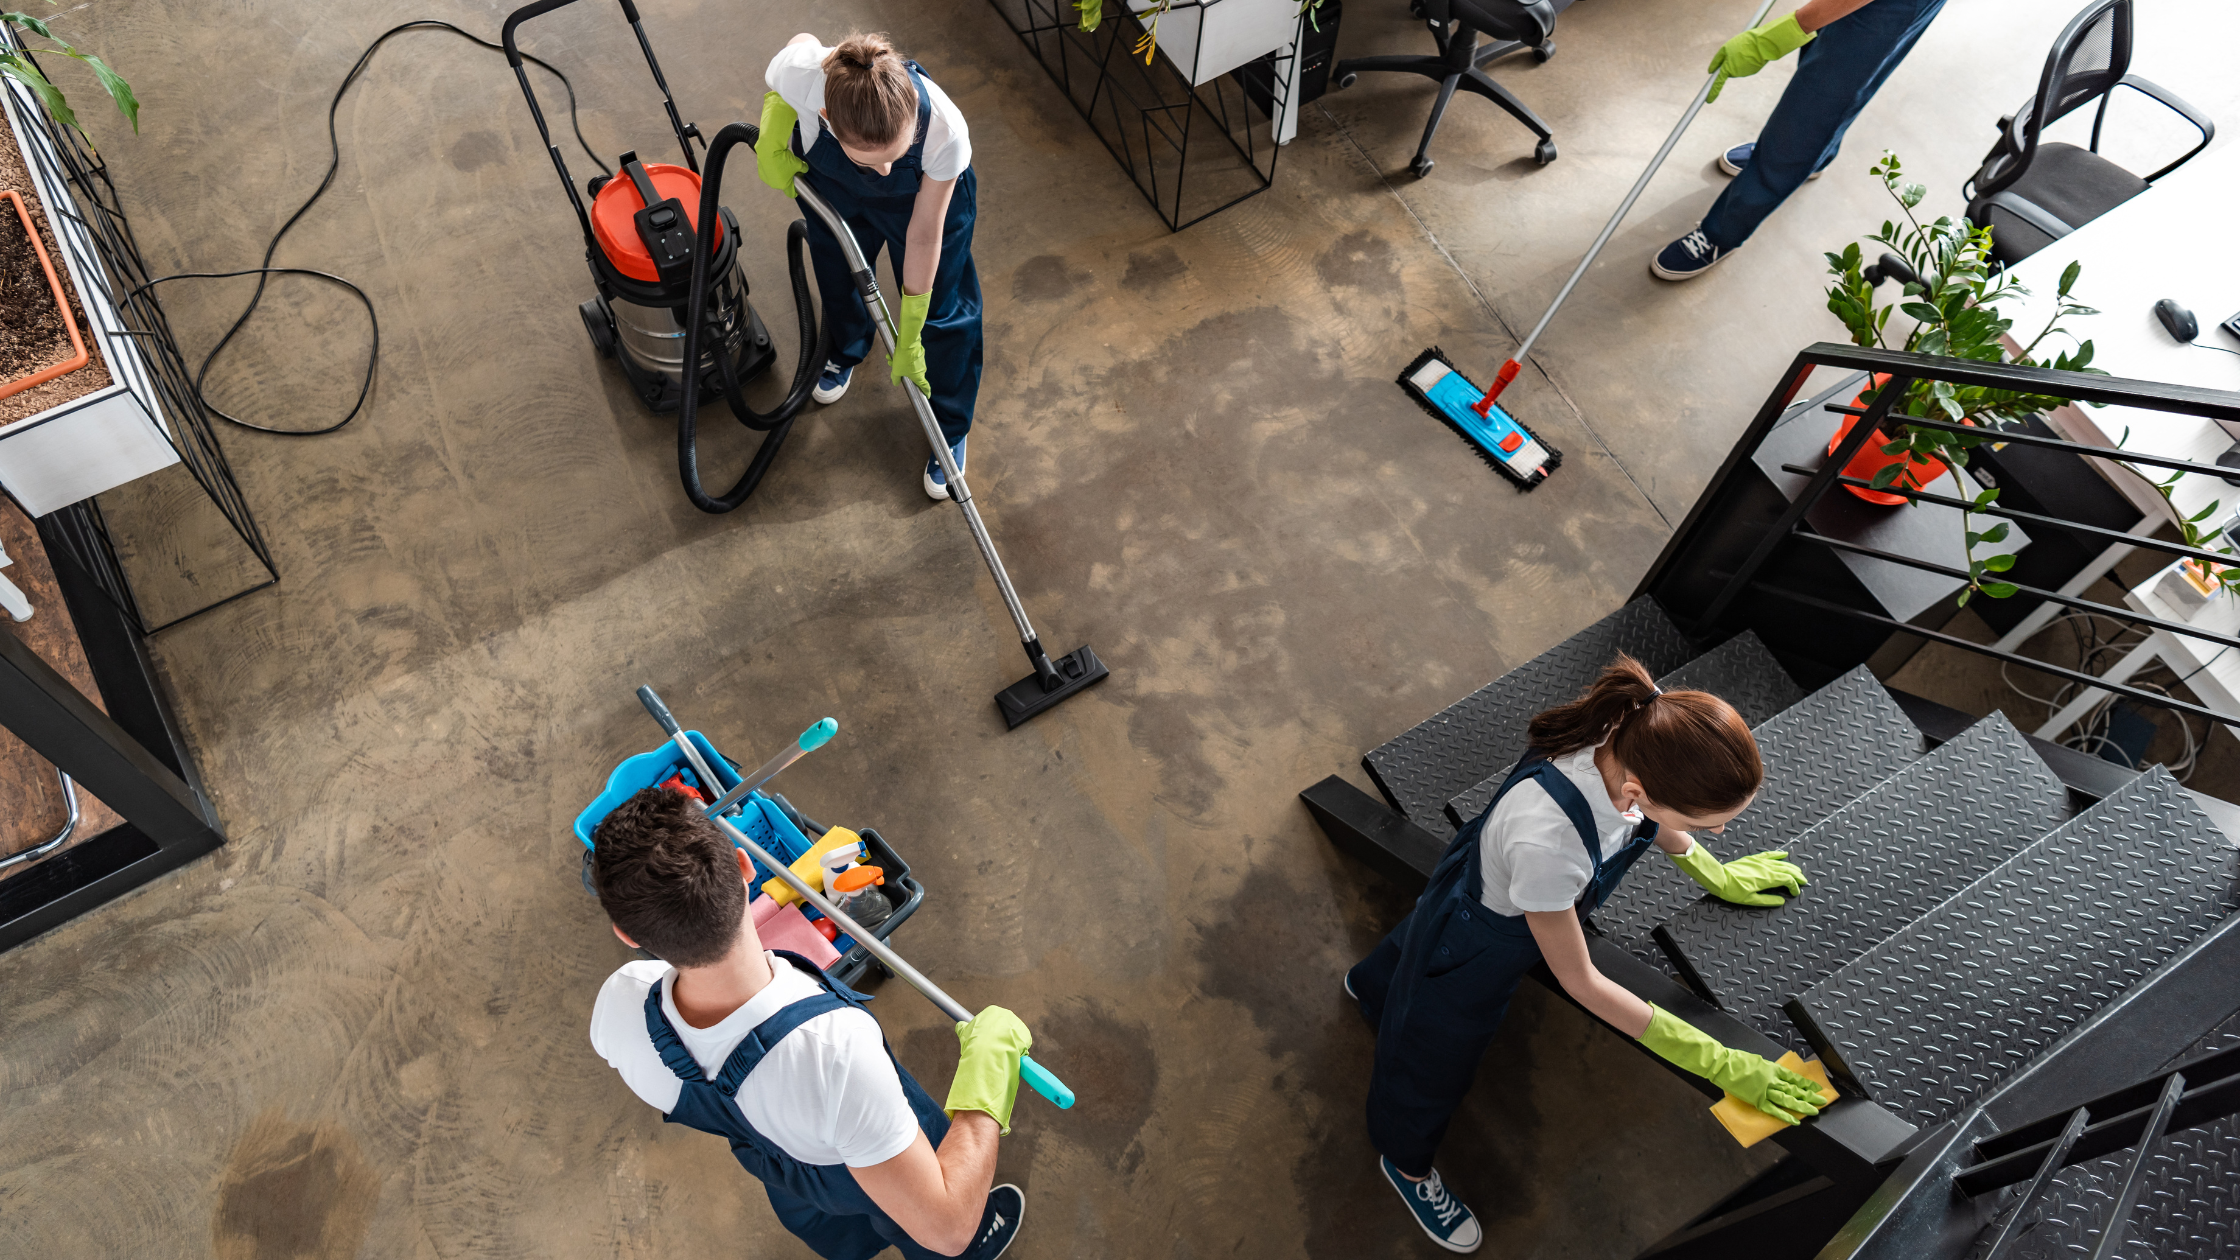 Regular Vs. Deep Commercial Cleaning in Buildings and Schools